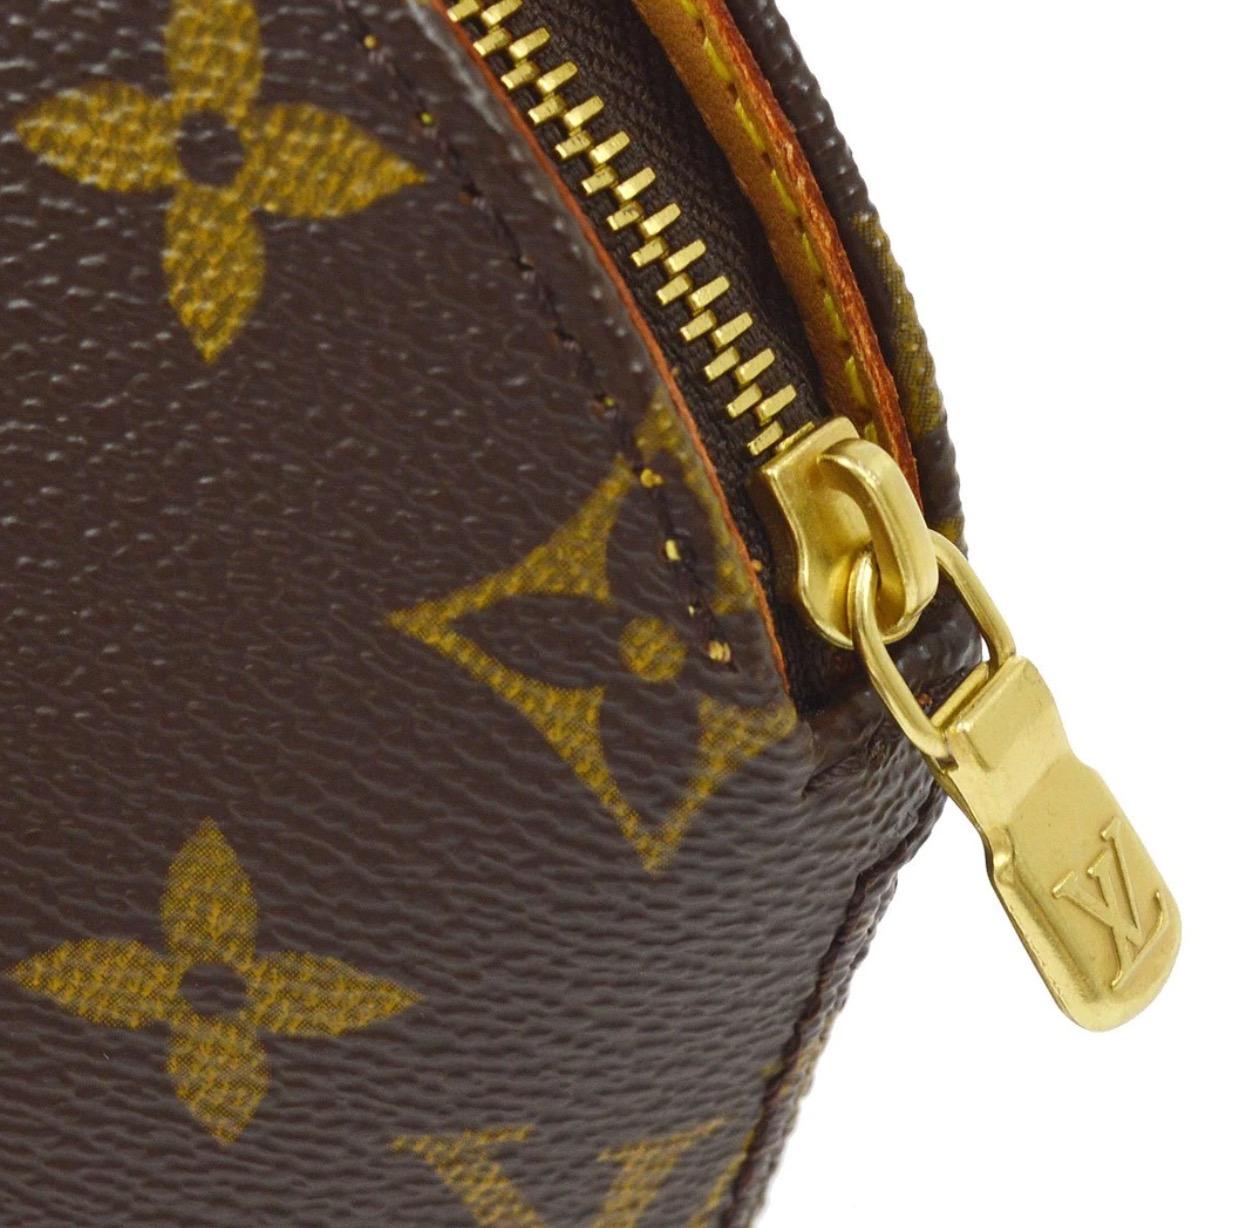 Monogram canvas
Leather
Gold tone hardware
Woven lining
Zipper closure
Date code present
Measures 4.25